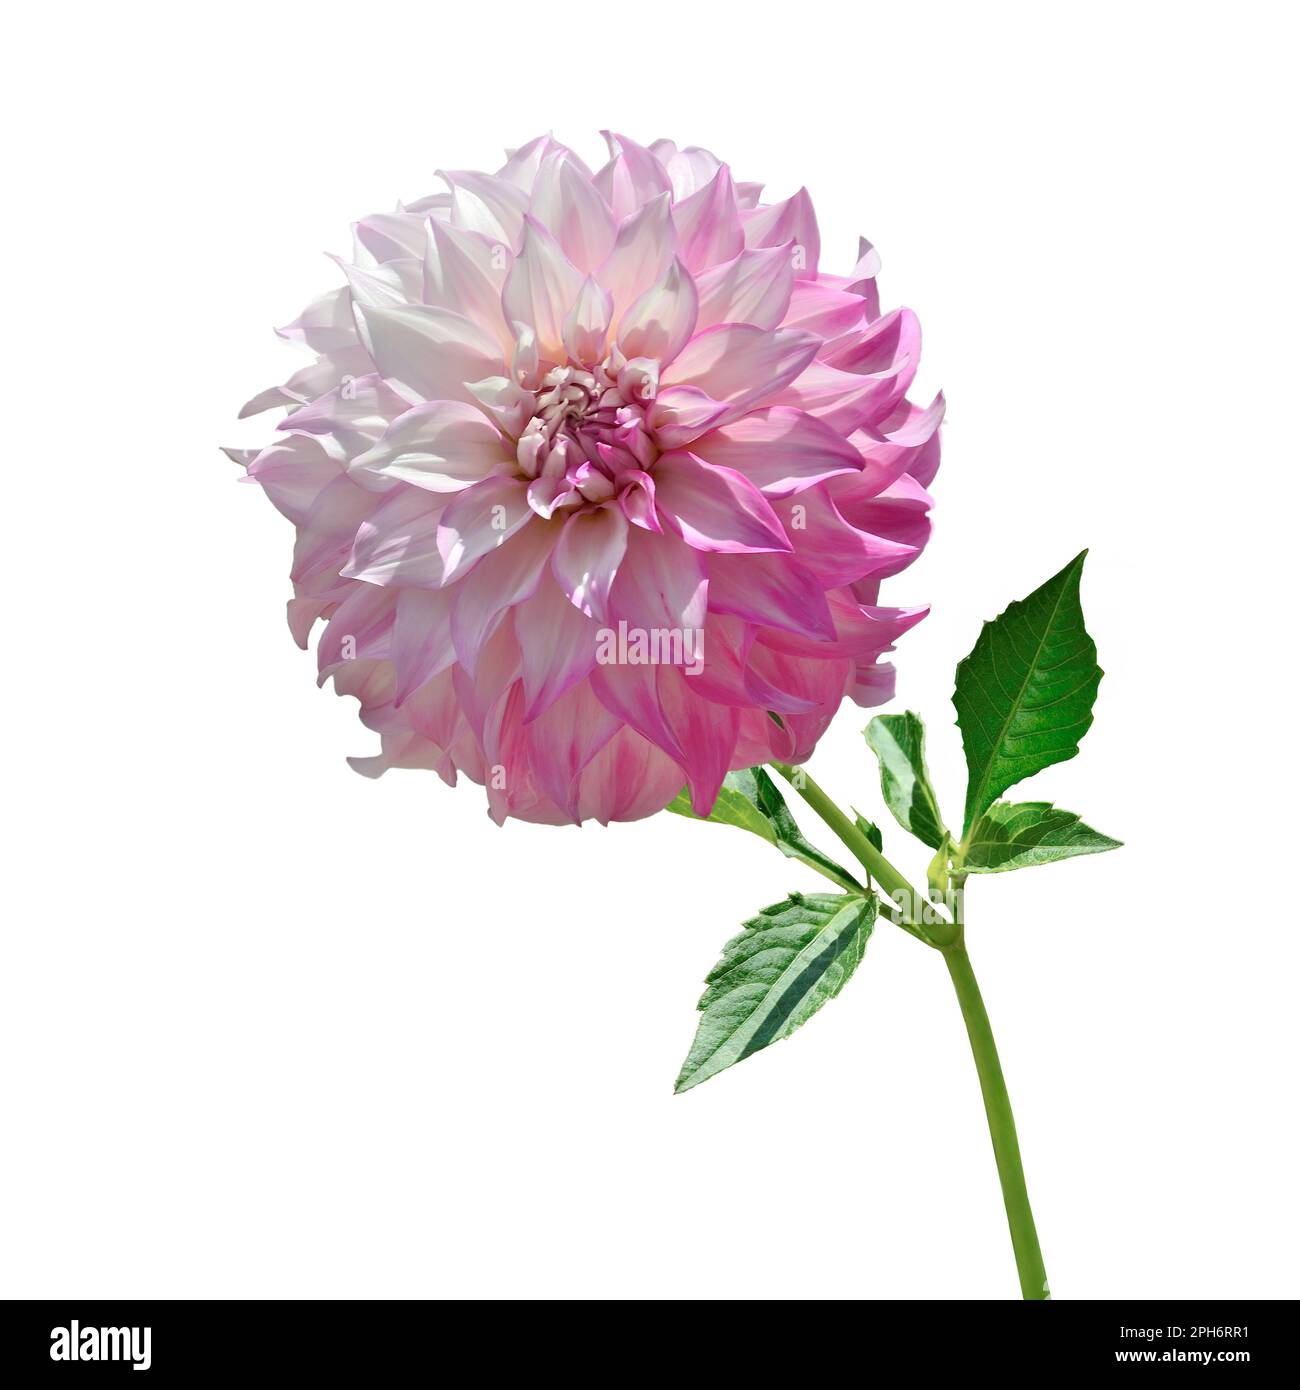 Beautiful pink -white dahlia flower head in full blossom close up, on white background isolated. Delicate decorative Dahlia flower with stem and leave Stock Photo